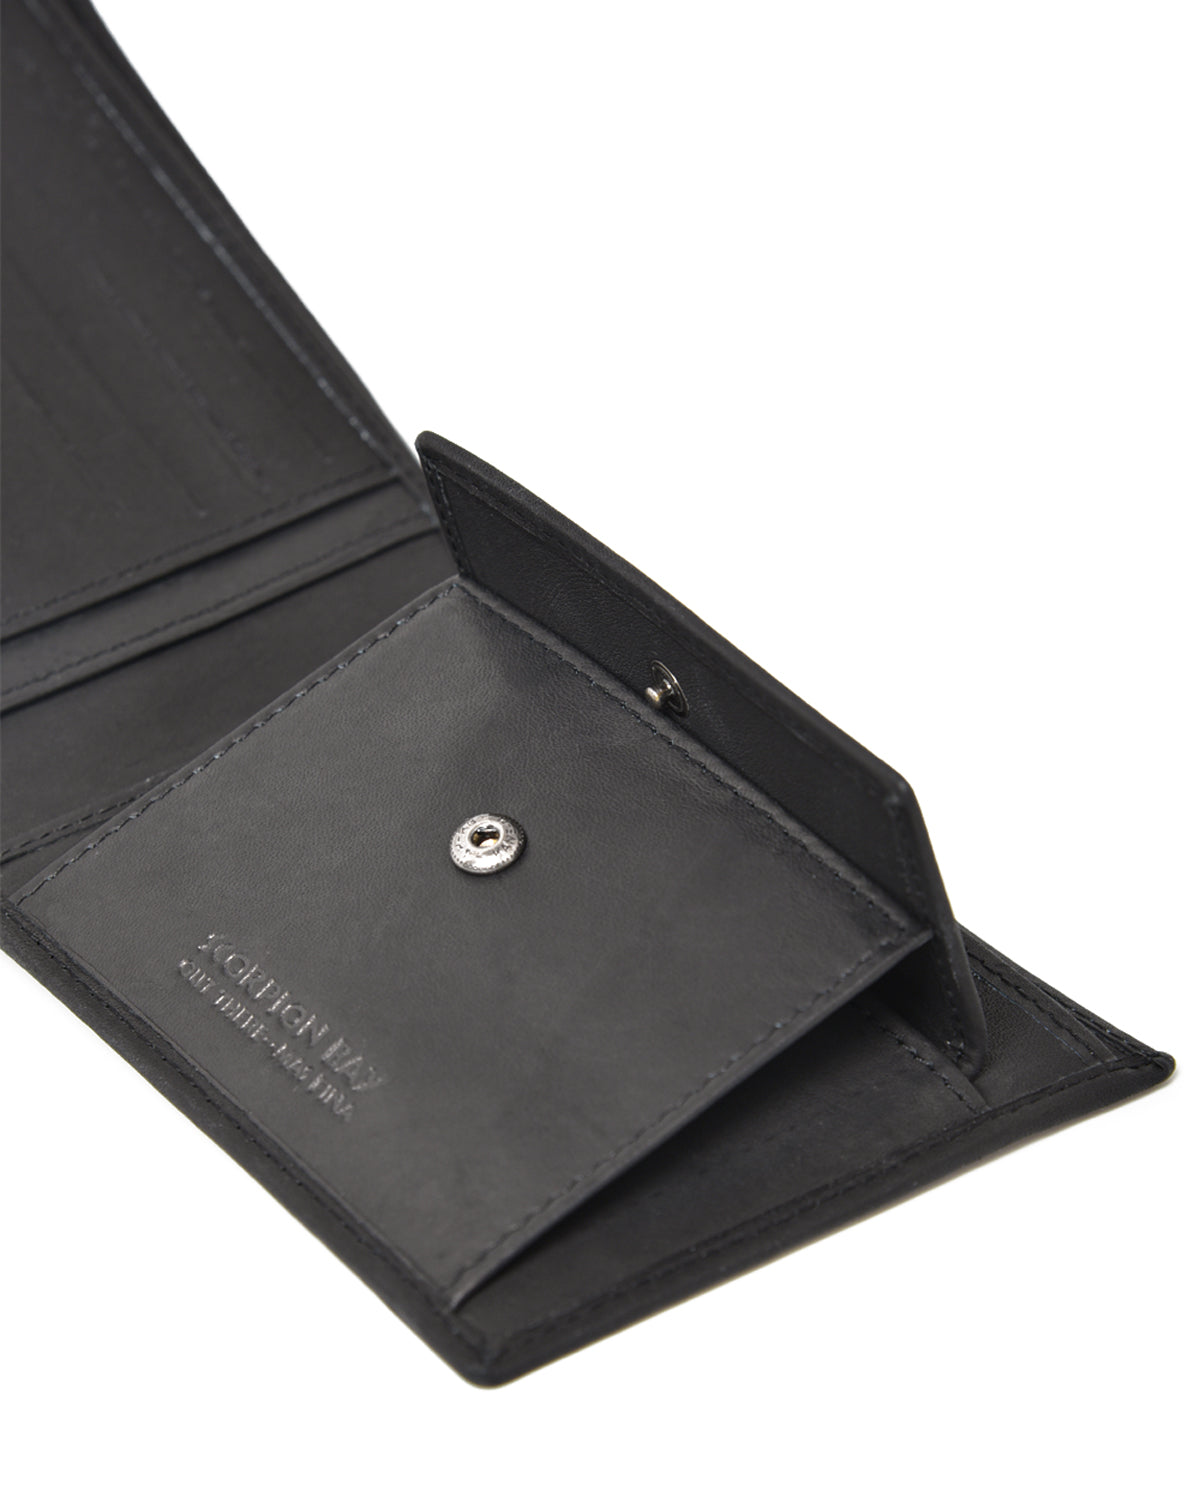 Black Leather Horizontal Wallet With Riveted Logo